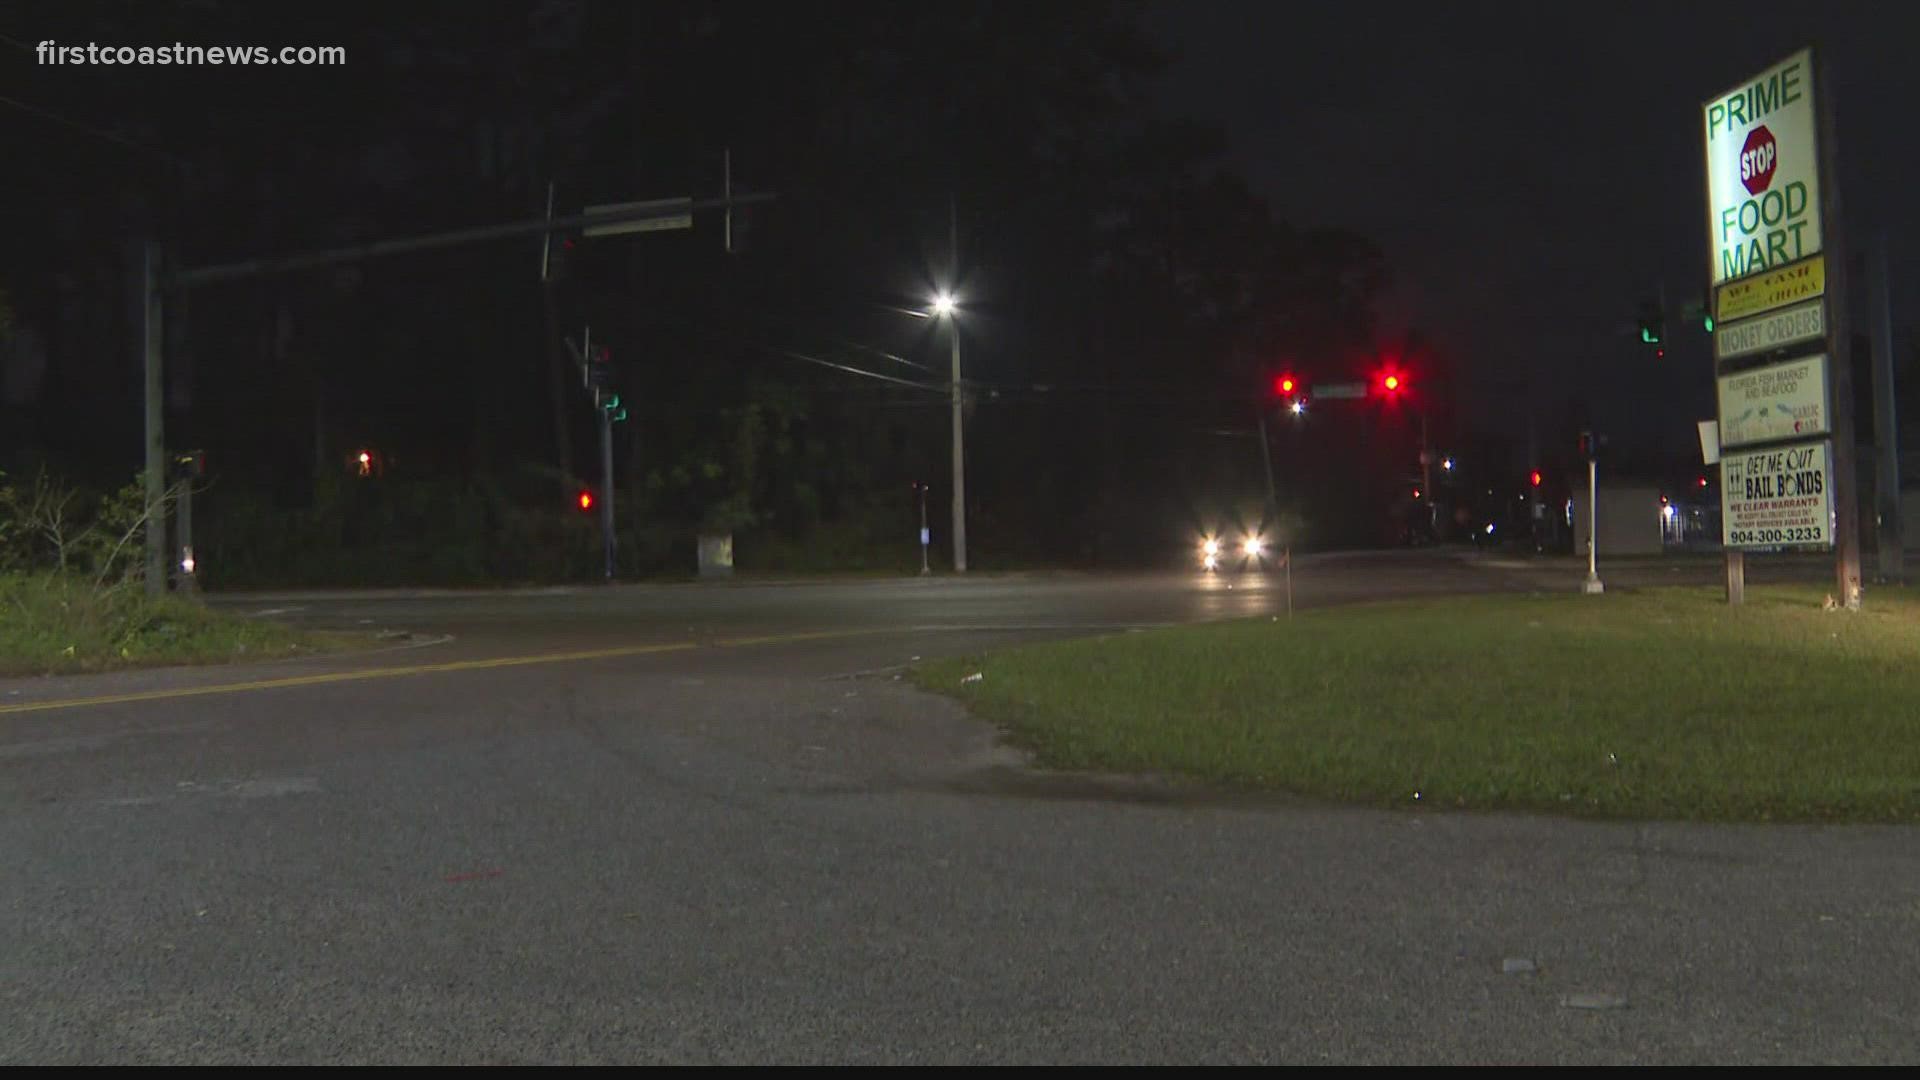 The victim was walking along Lane Avenue near Londontowne Lane when he was approached from behind, robbed and stabbed in the neck, JSO said.